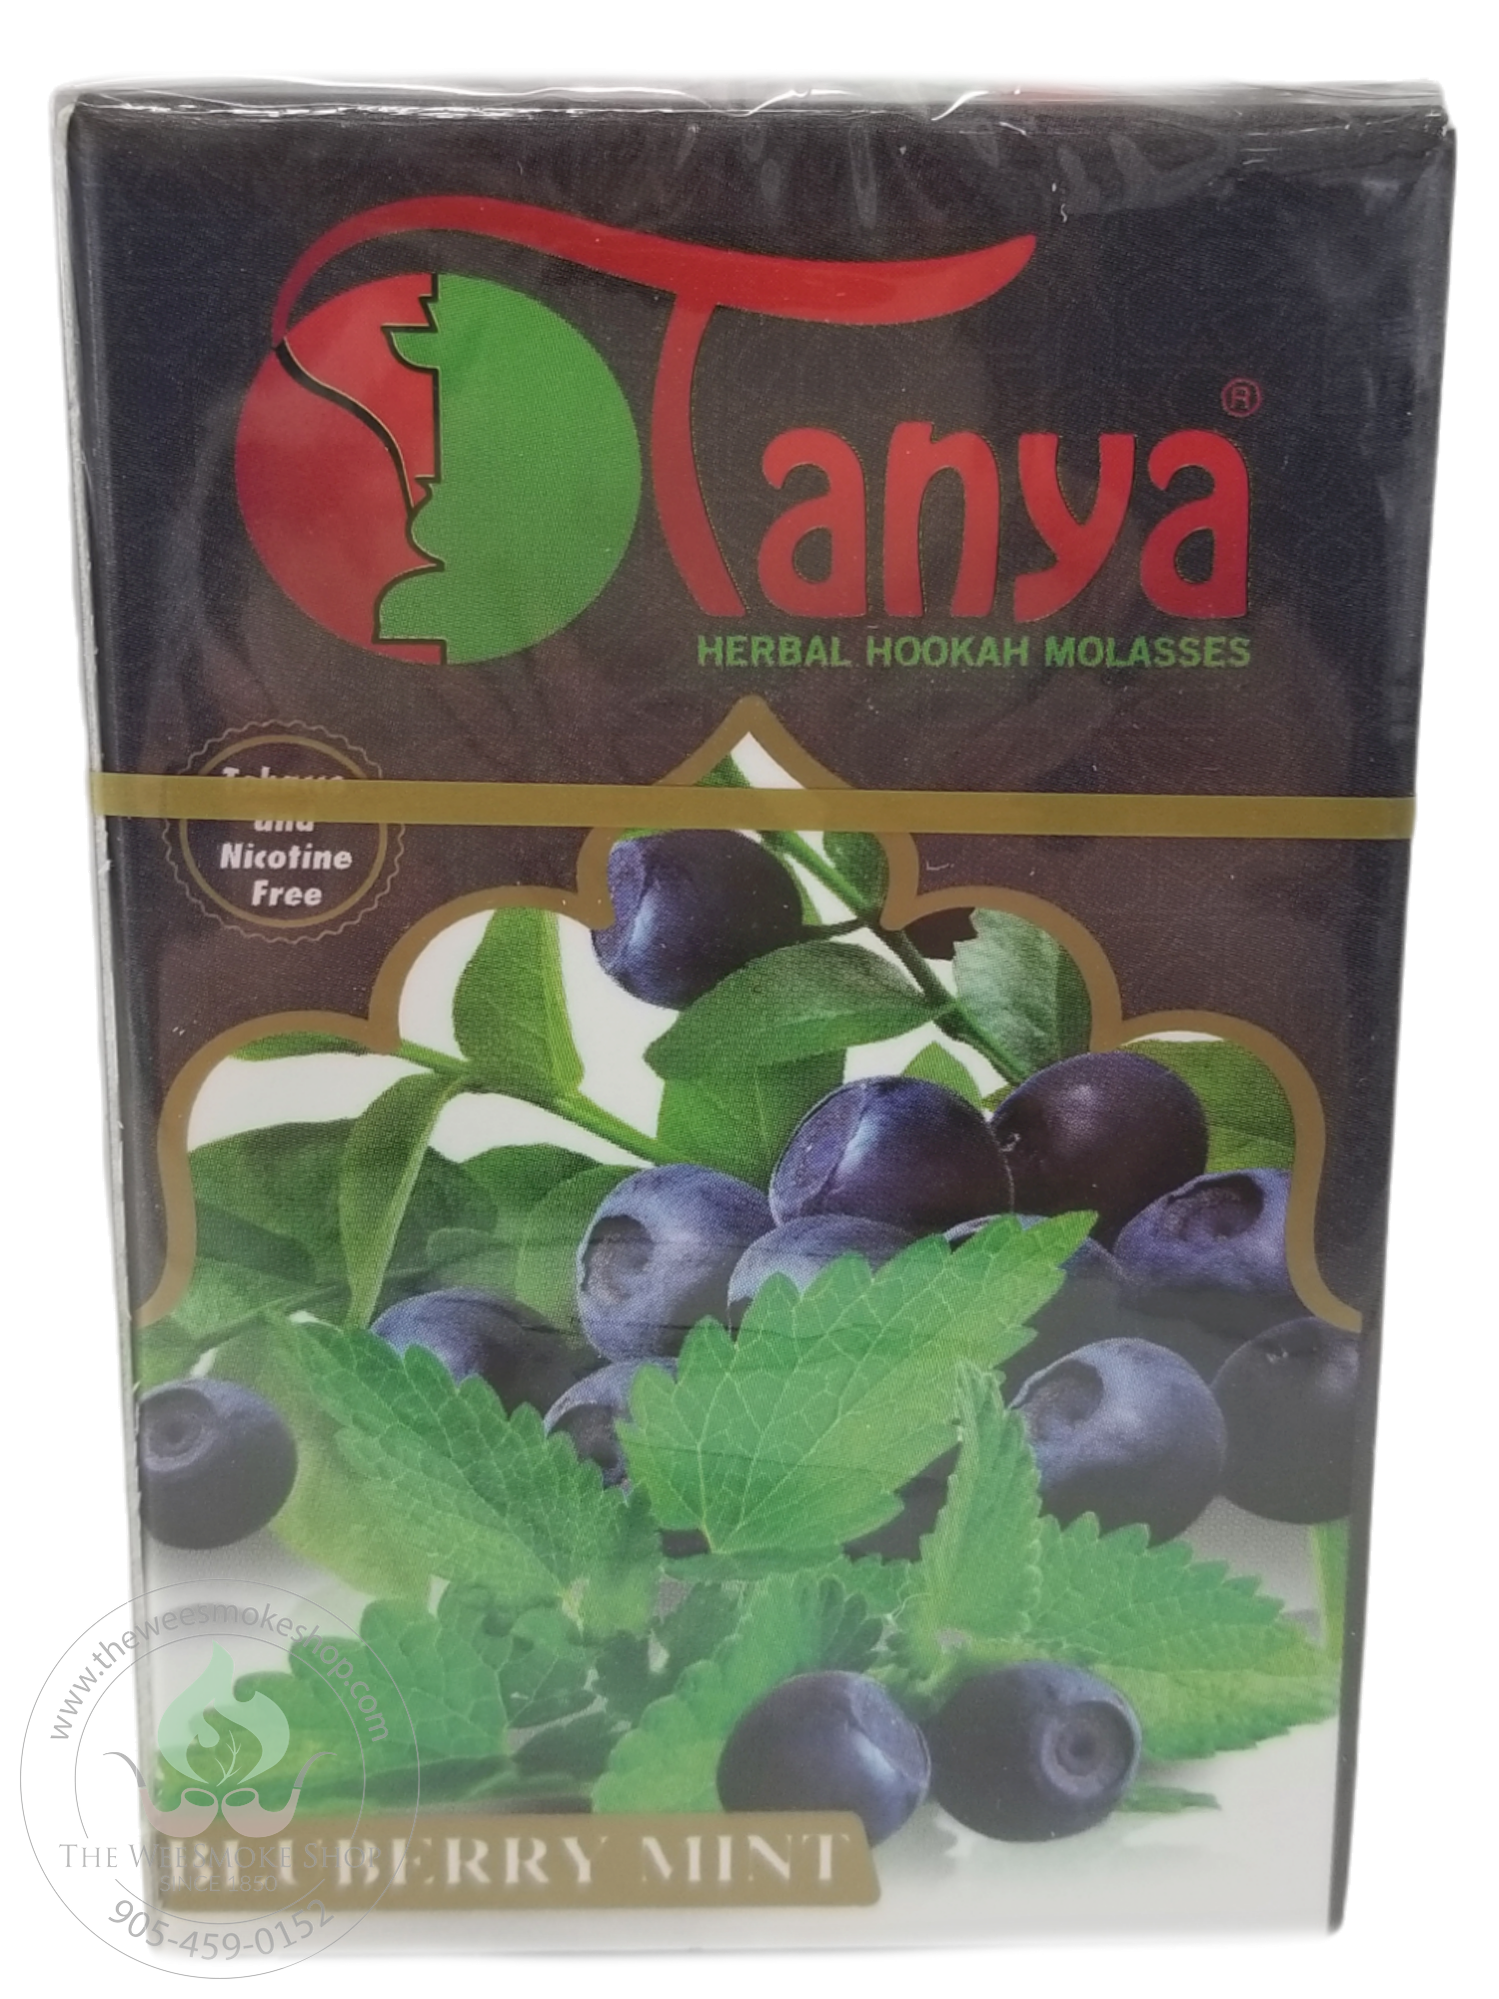 Blueberry Mint Tanya Herbal Molasses (50g)-Hookah accessories-The Wee Smoke Shop